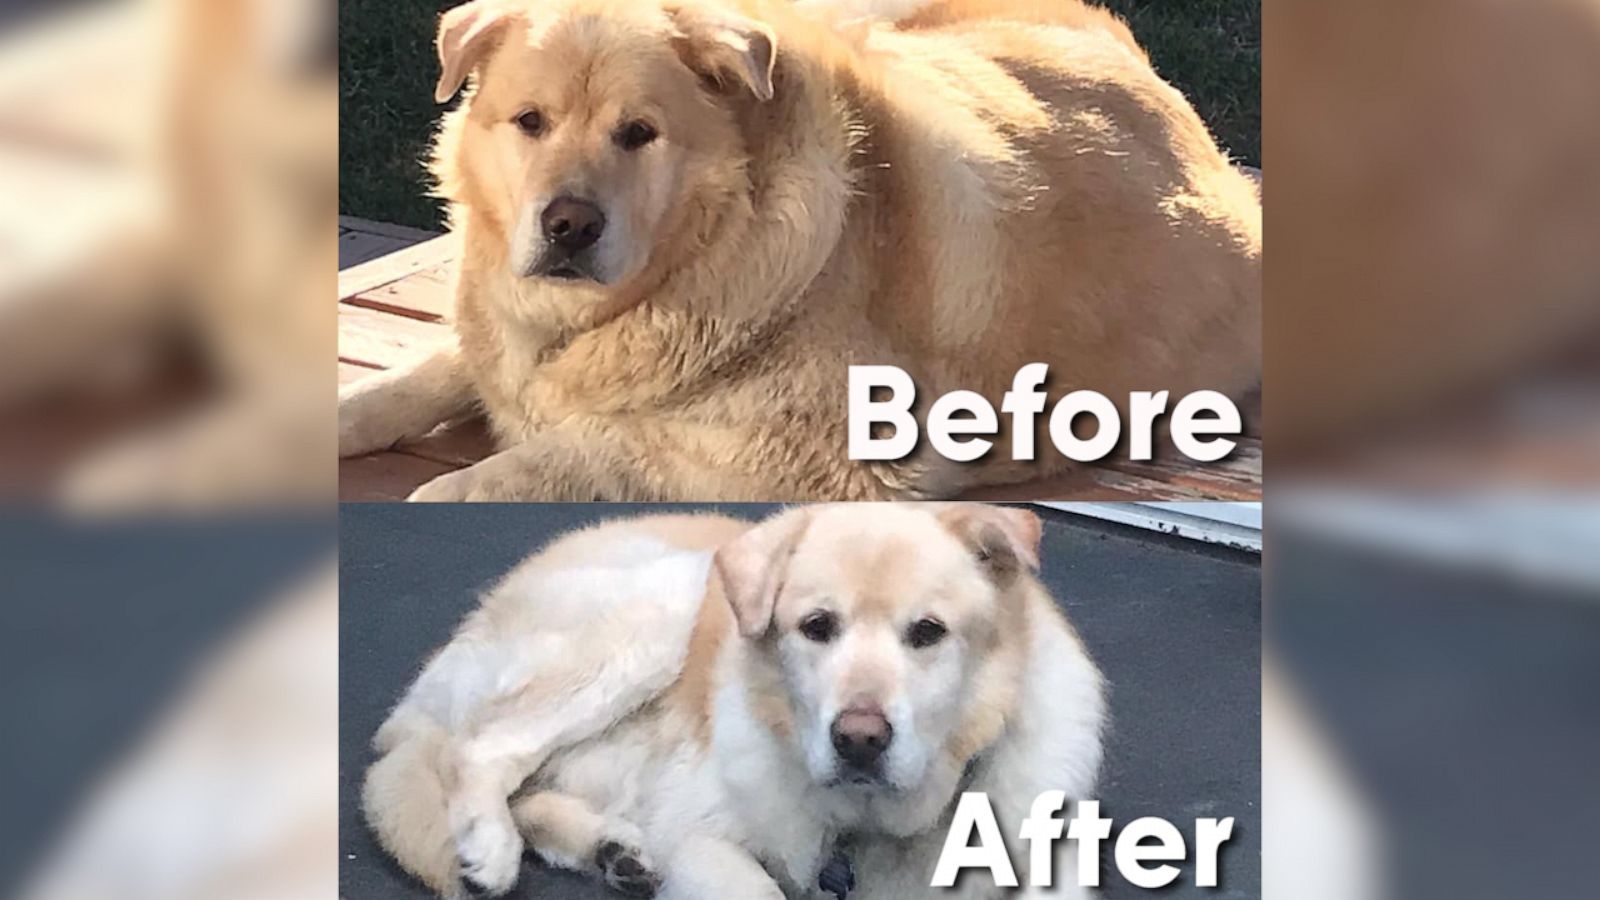 VIDEO: Joyful golden retriever has a new leash on life after losing 100 pounds in one year